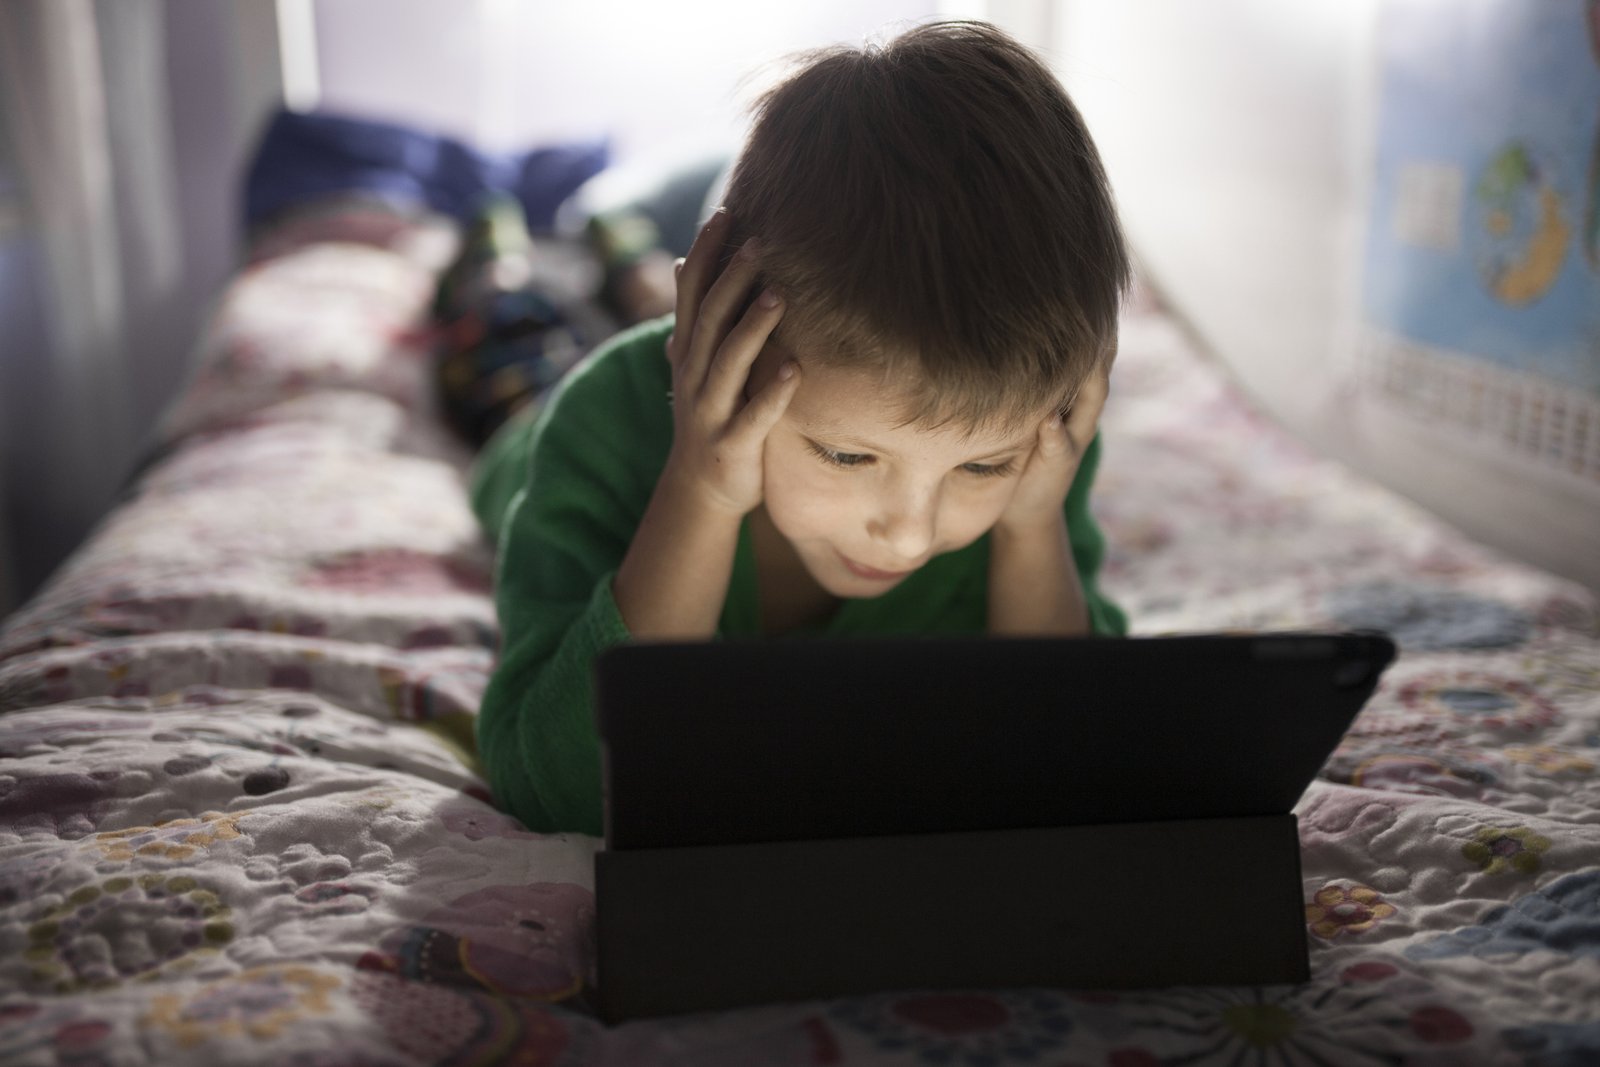 Limiting Children’s Screen Time To 3 Hours Weekly Boosts Mental Health In Days: Study